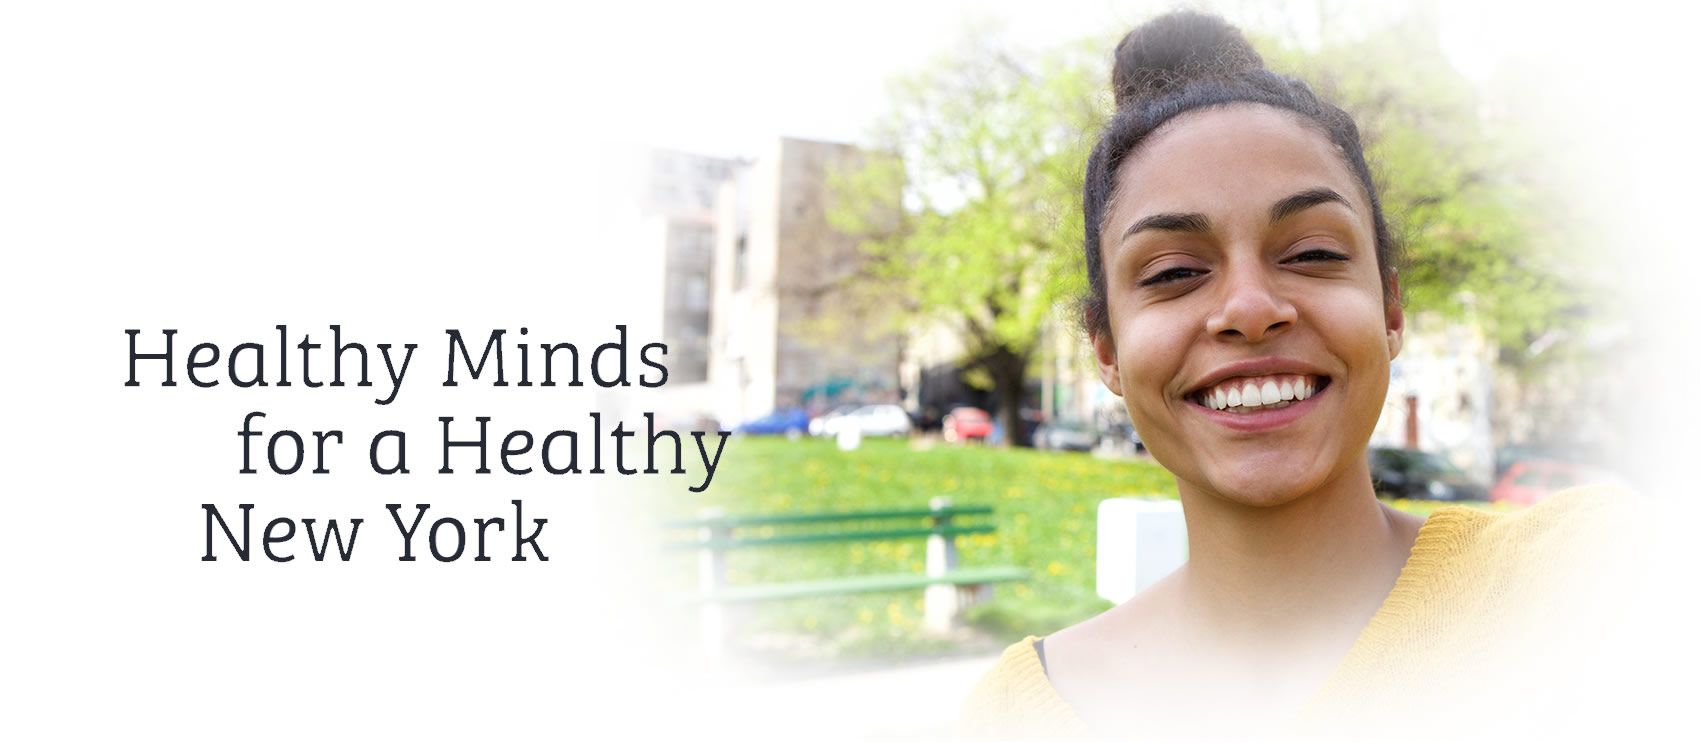 Healthy Minds for a Healthy New York